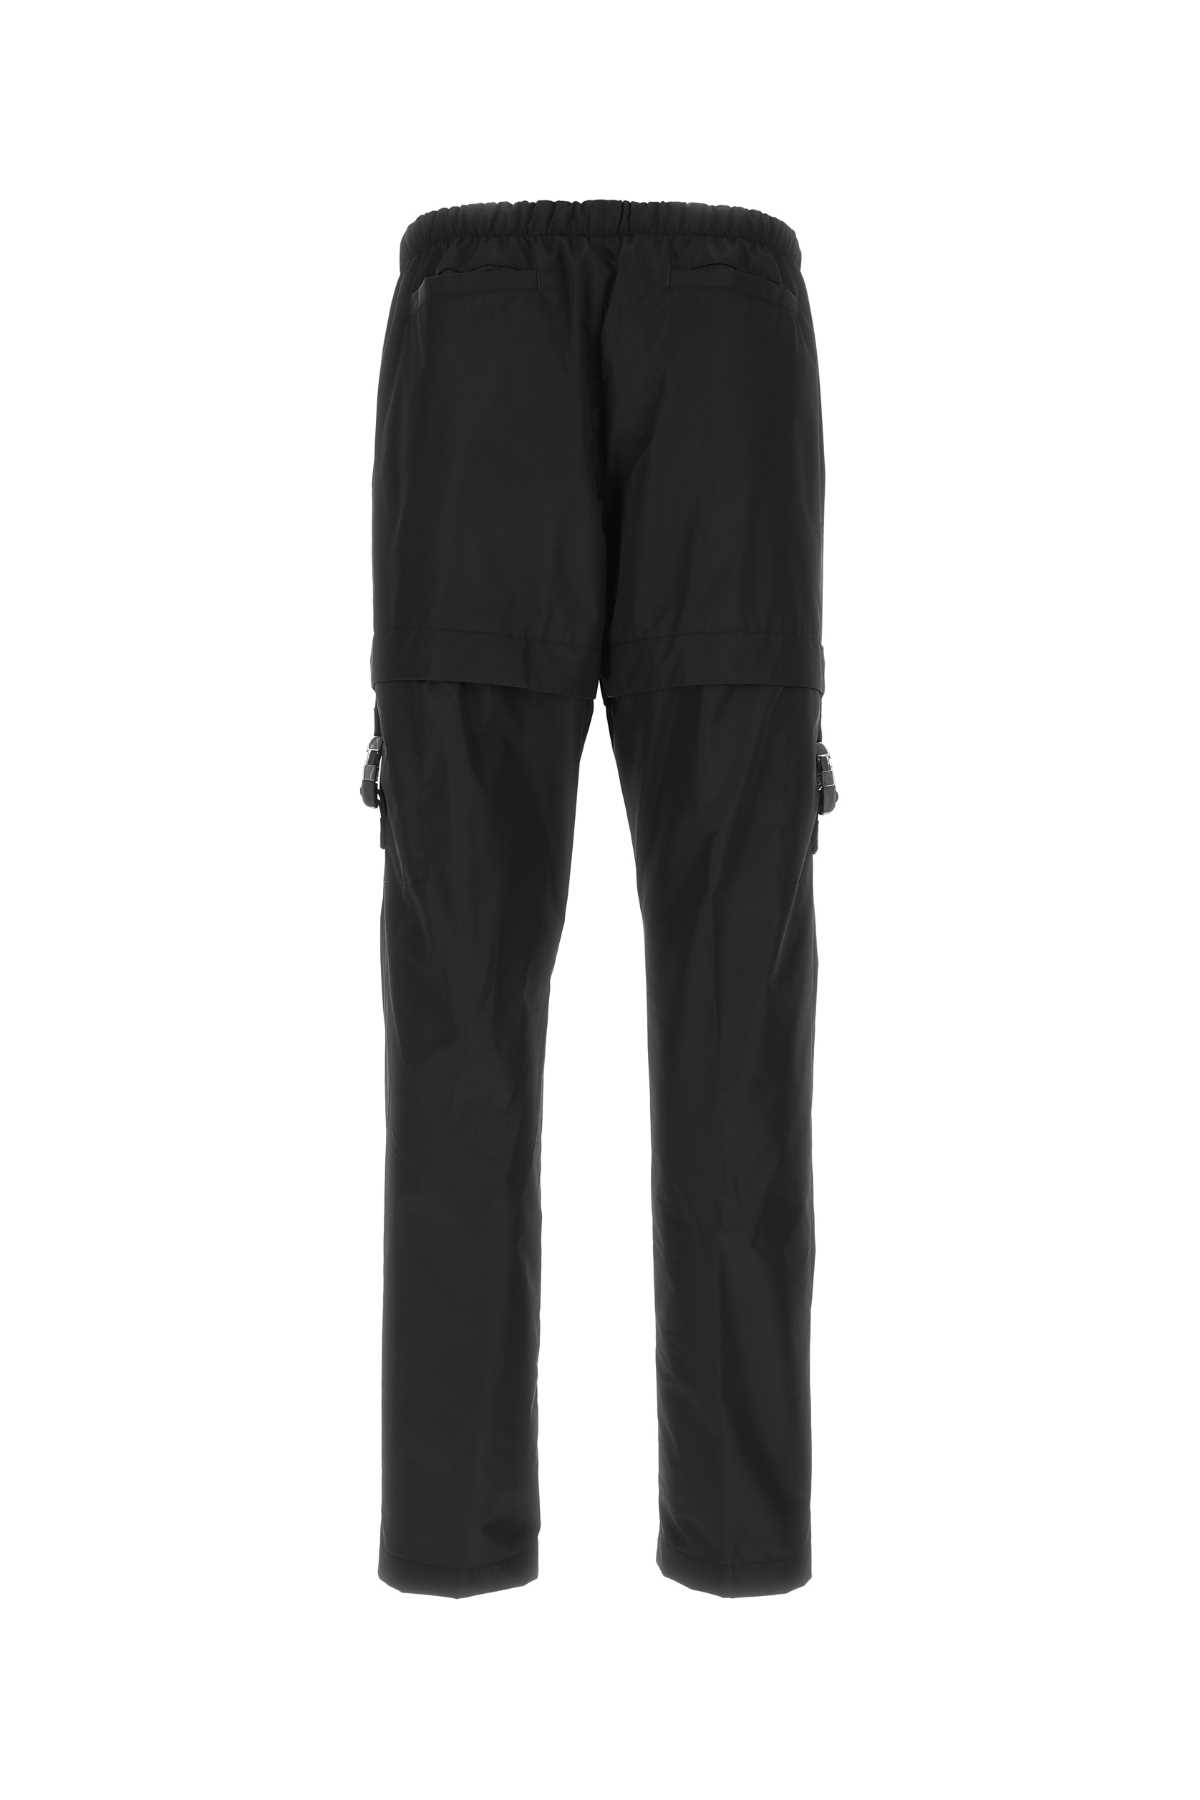 Givenchy Black Polyester Cargo Trouser In 001